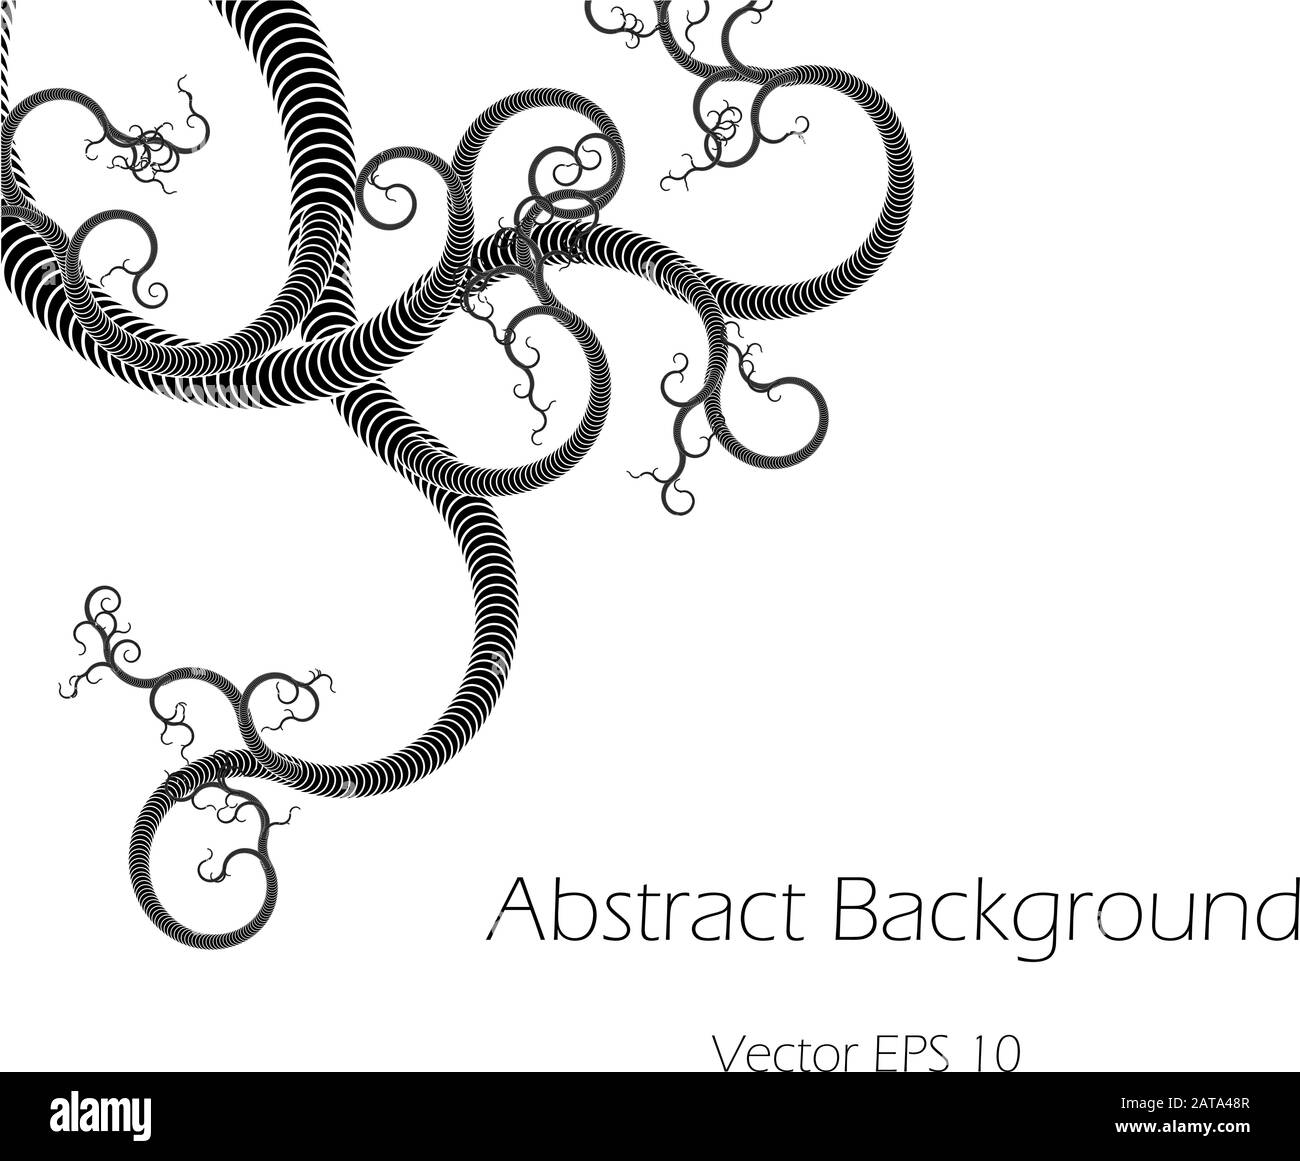 Abstract Vector Background  with Whorl Tentacles Plexus Stock Vector